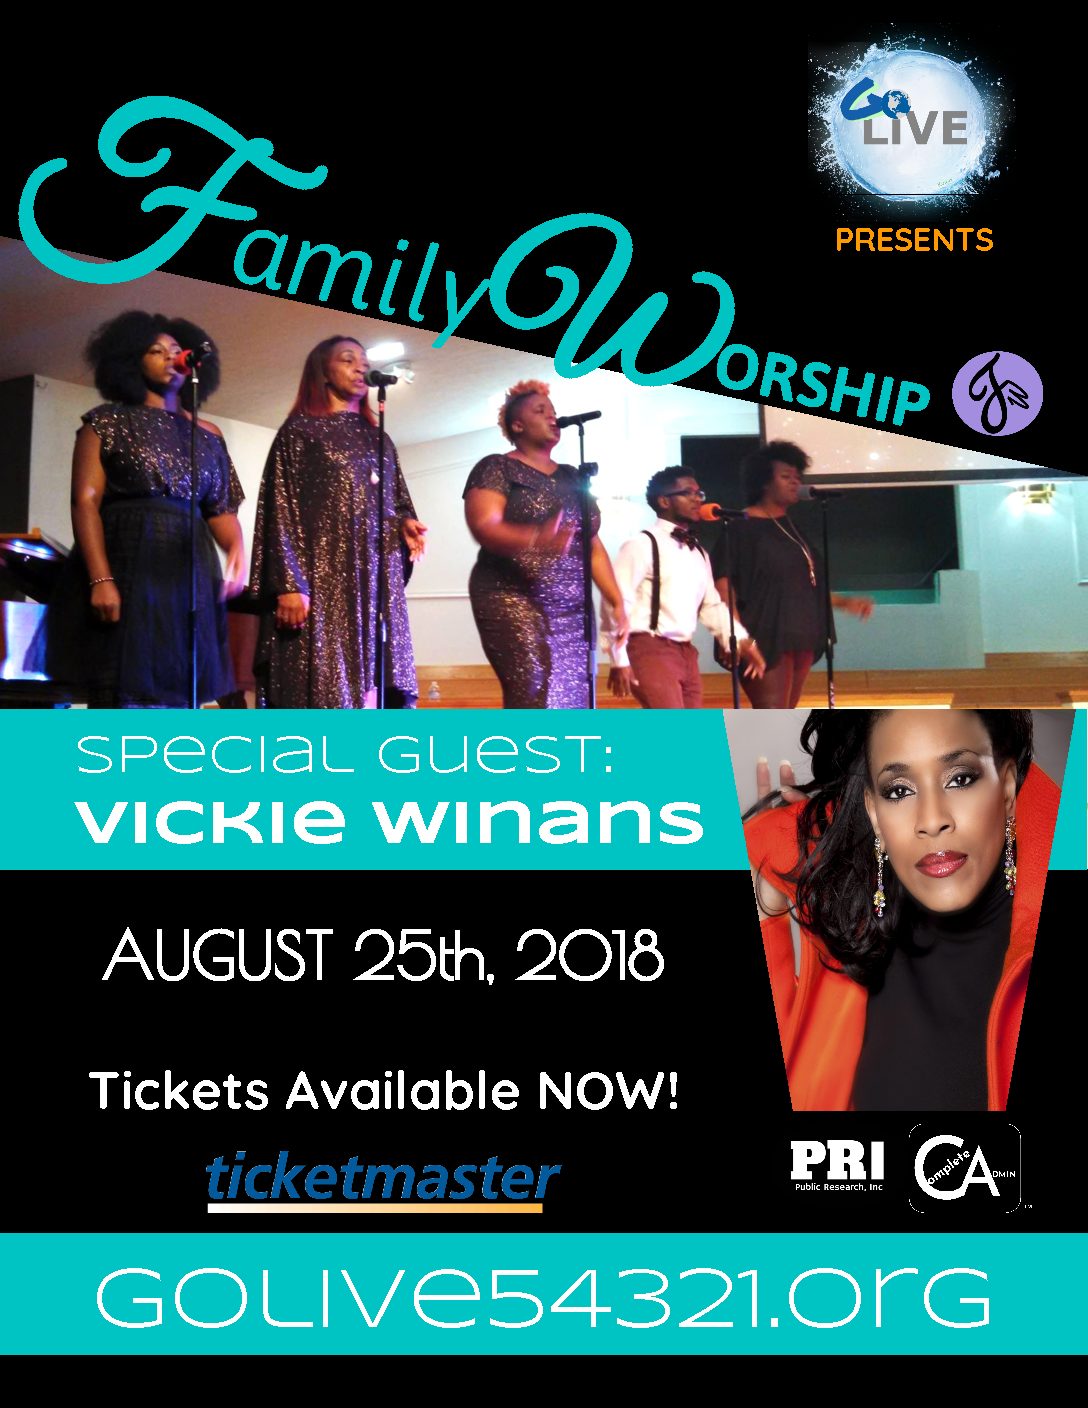 Golive!!! With "Vickie Winans," "Family Worship," "G. Allen Battle"